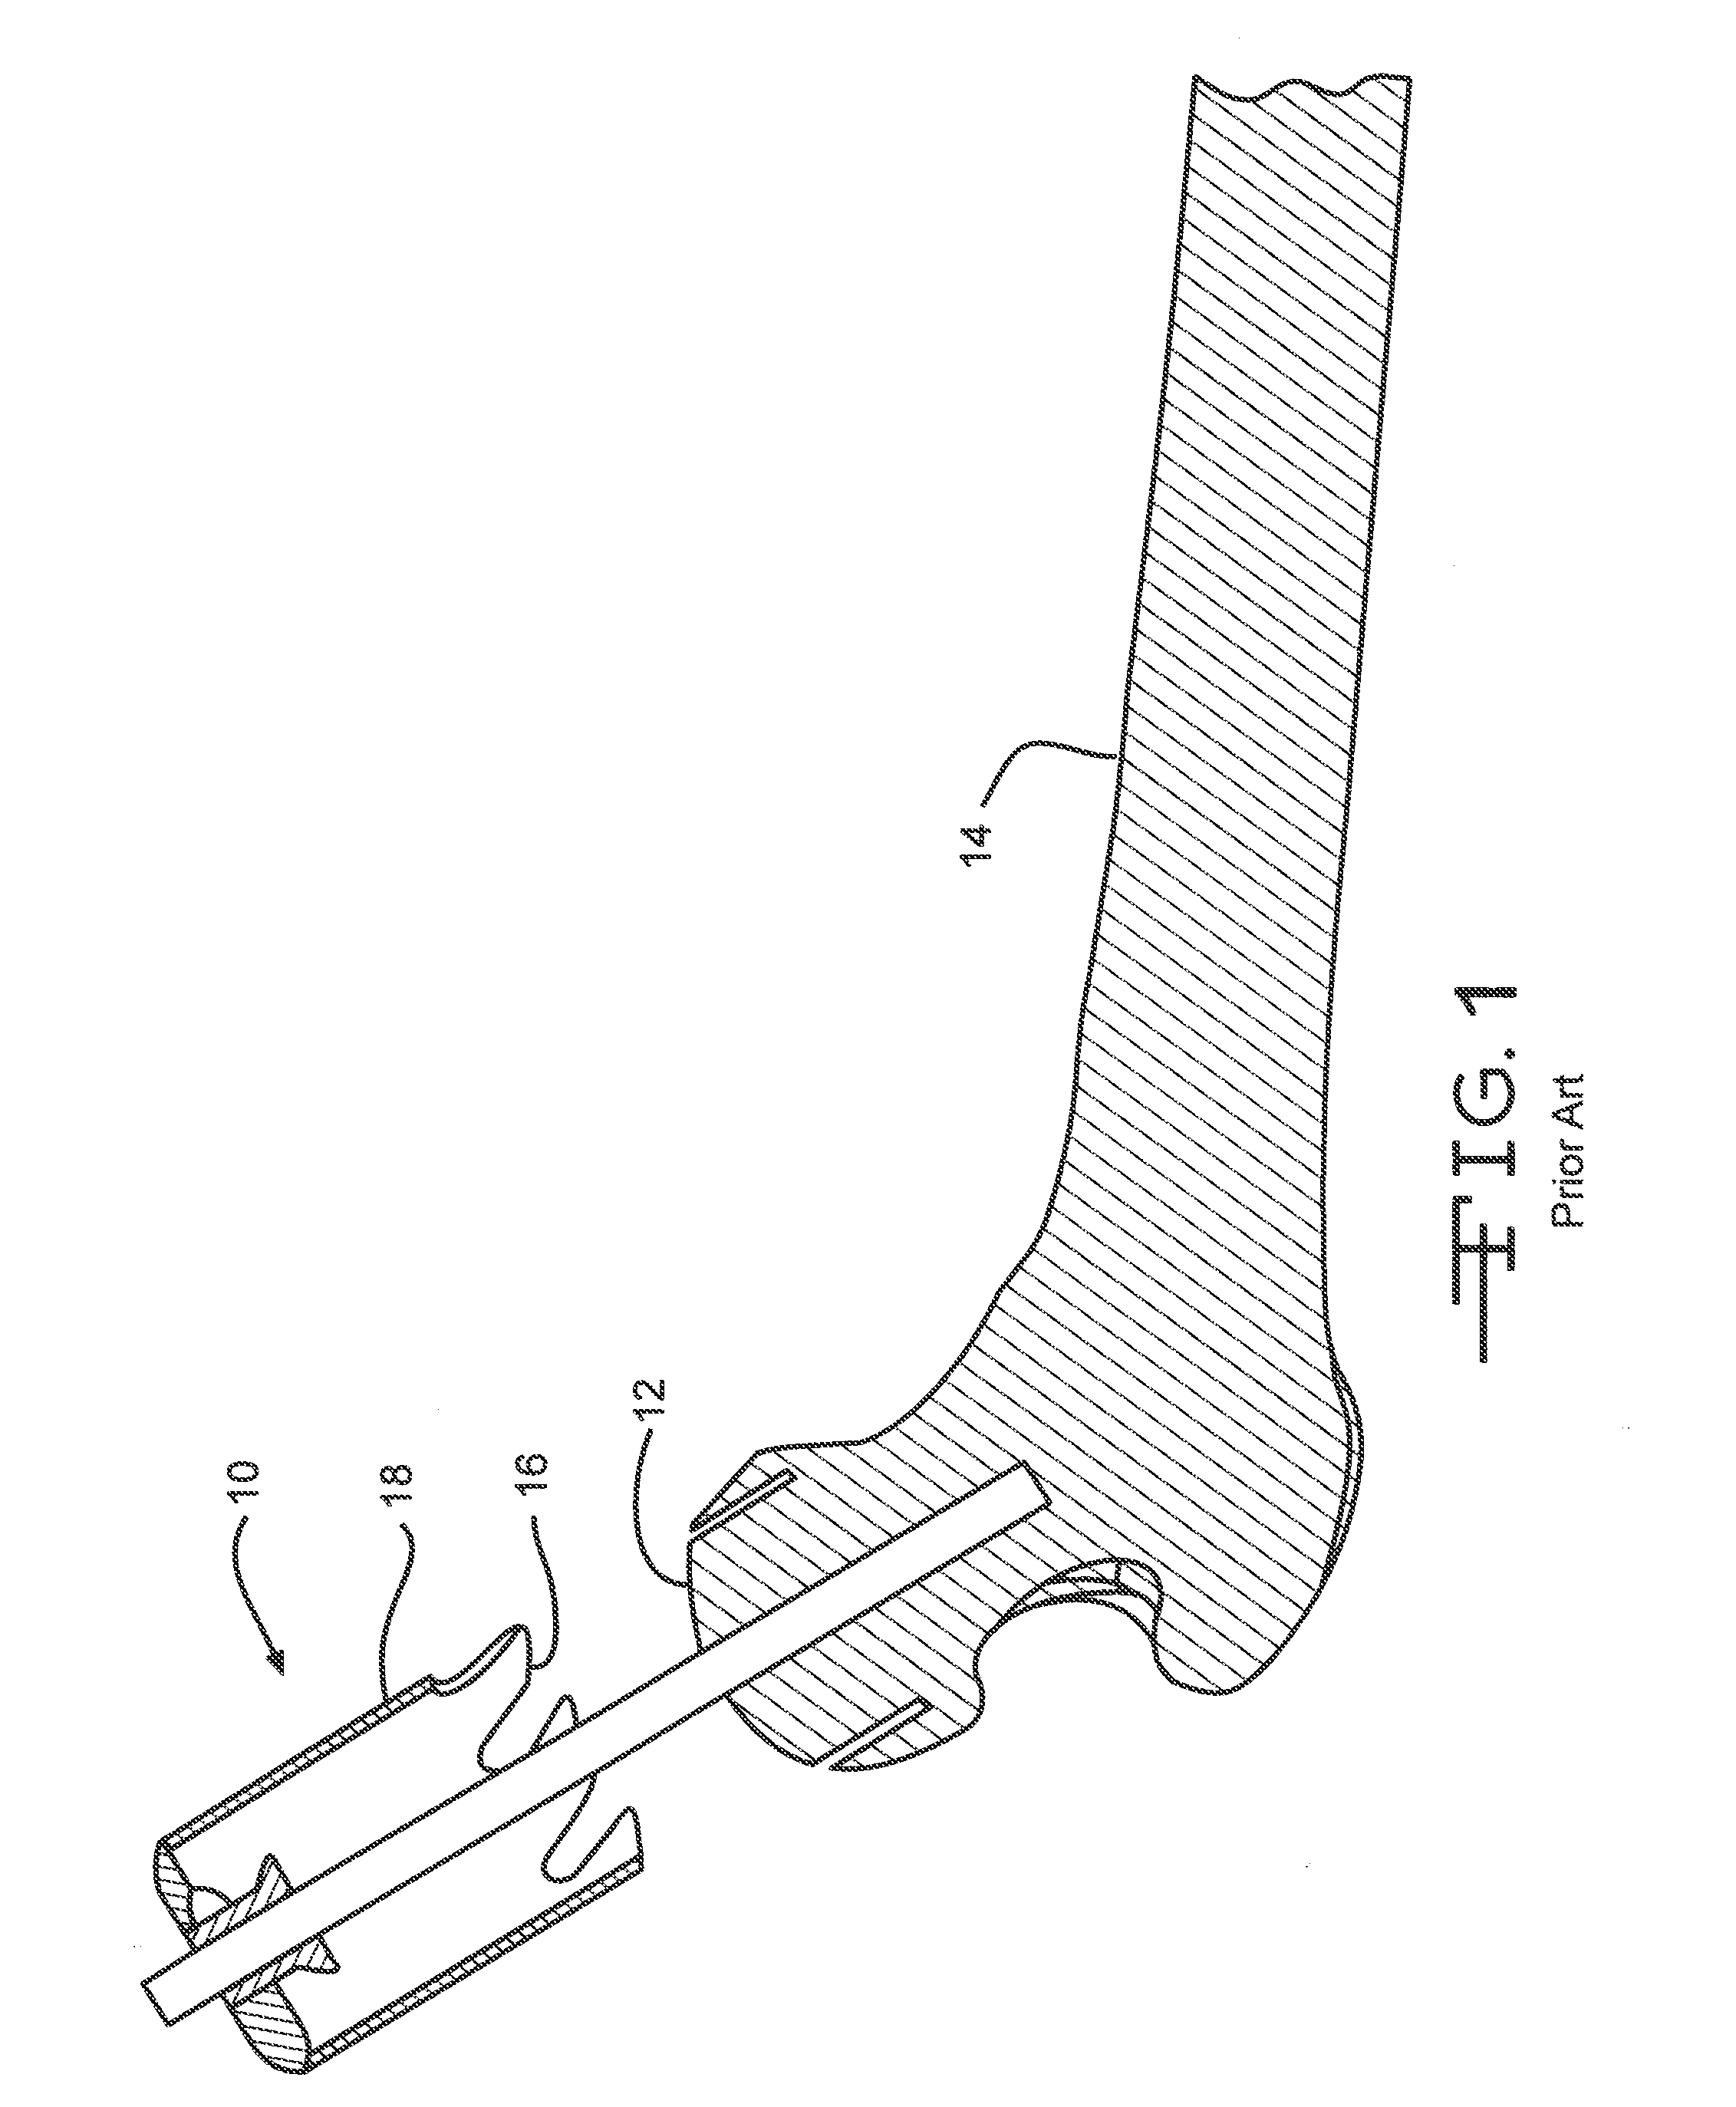 Disposable Surgical Cutter For Shaping The Head Of A Femur